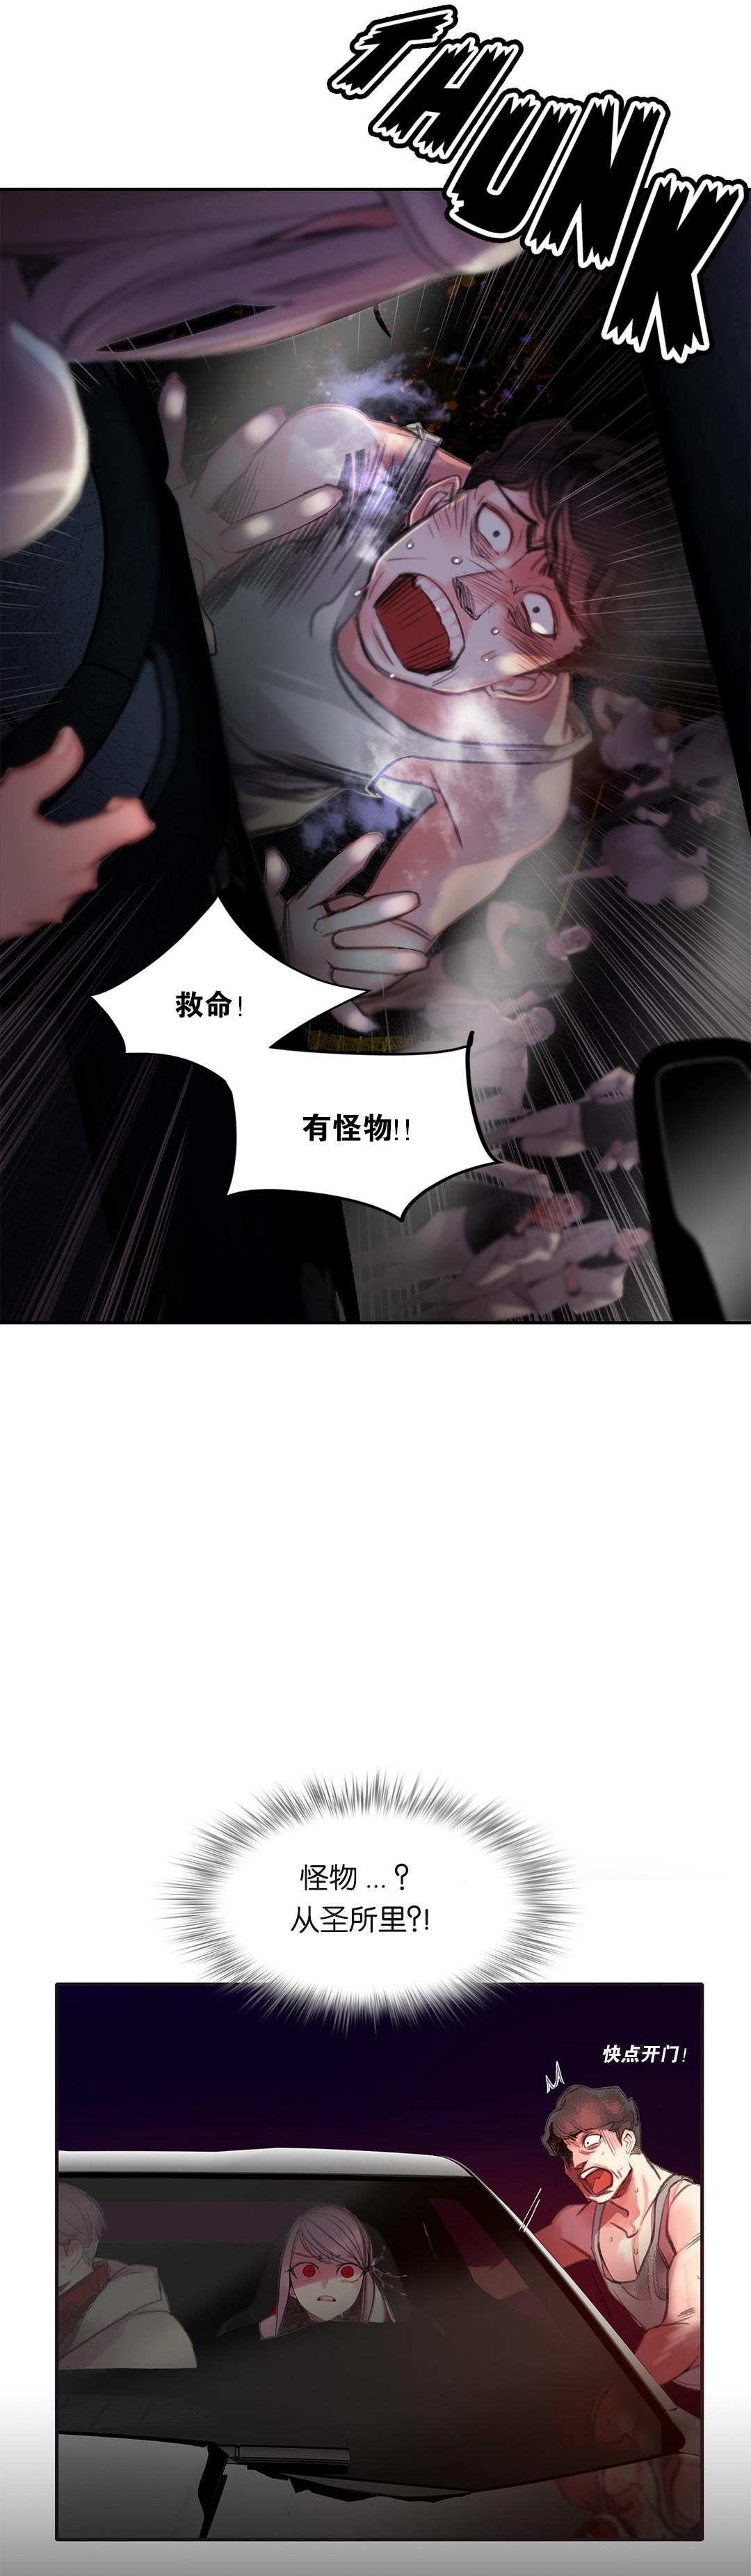 [Juder] Lilith`s Cord (第二季) Ch.61-63 [Chinese] [aaatwist个人汉化] [Ongoing] 14